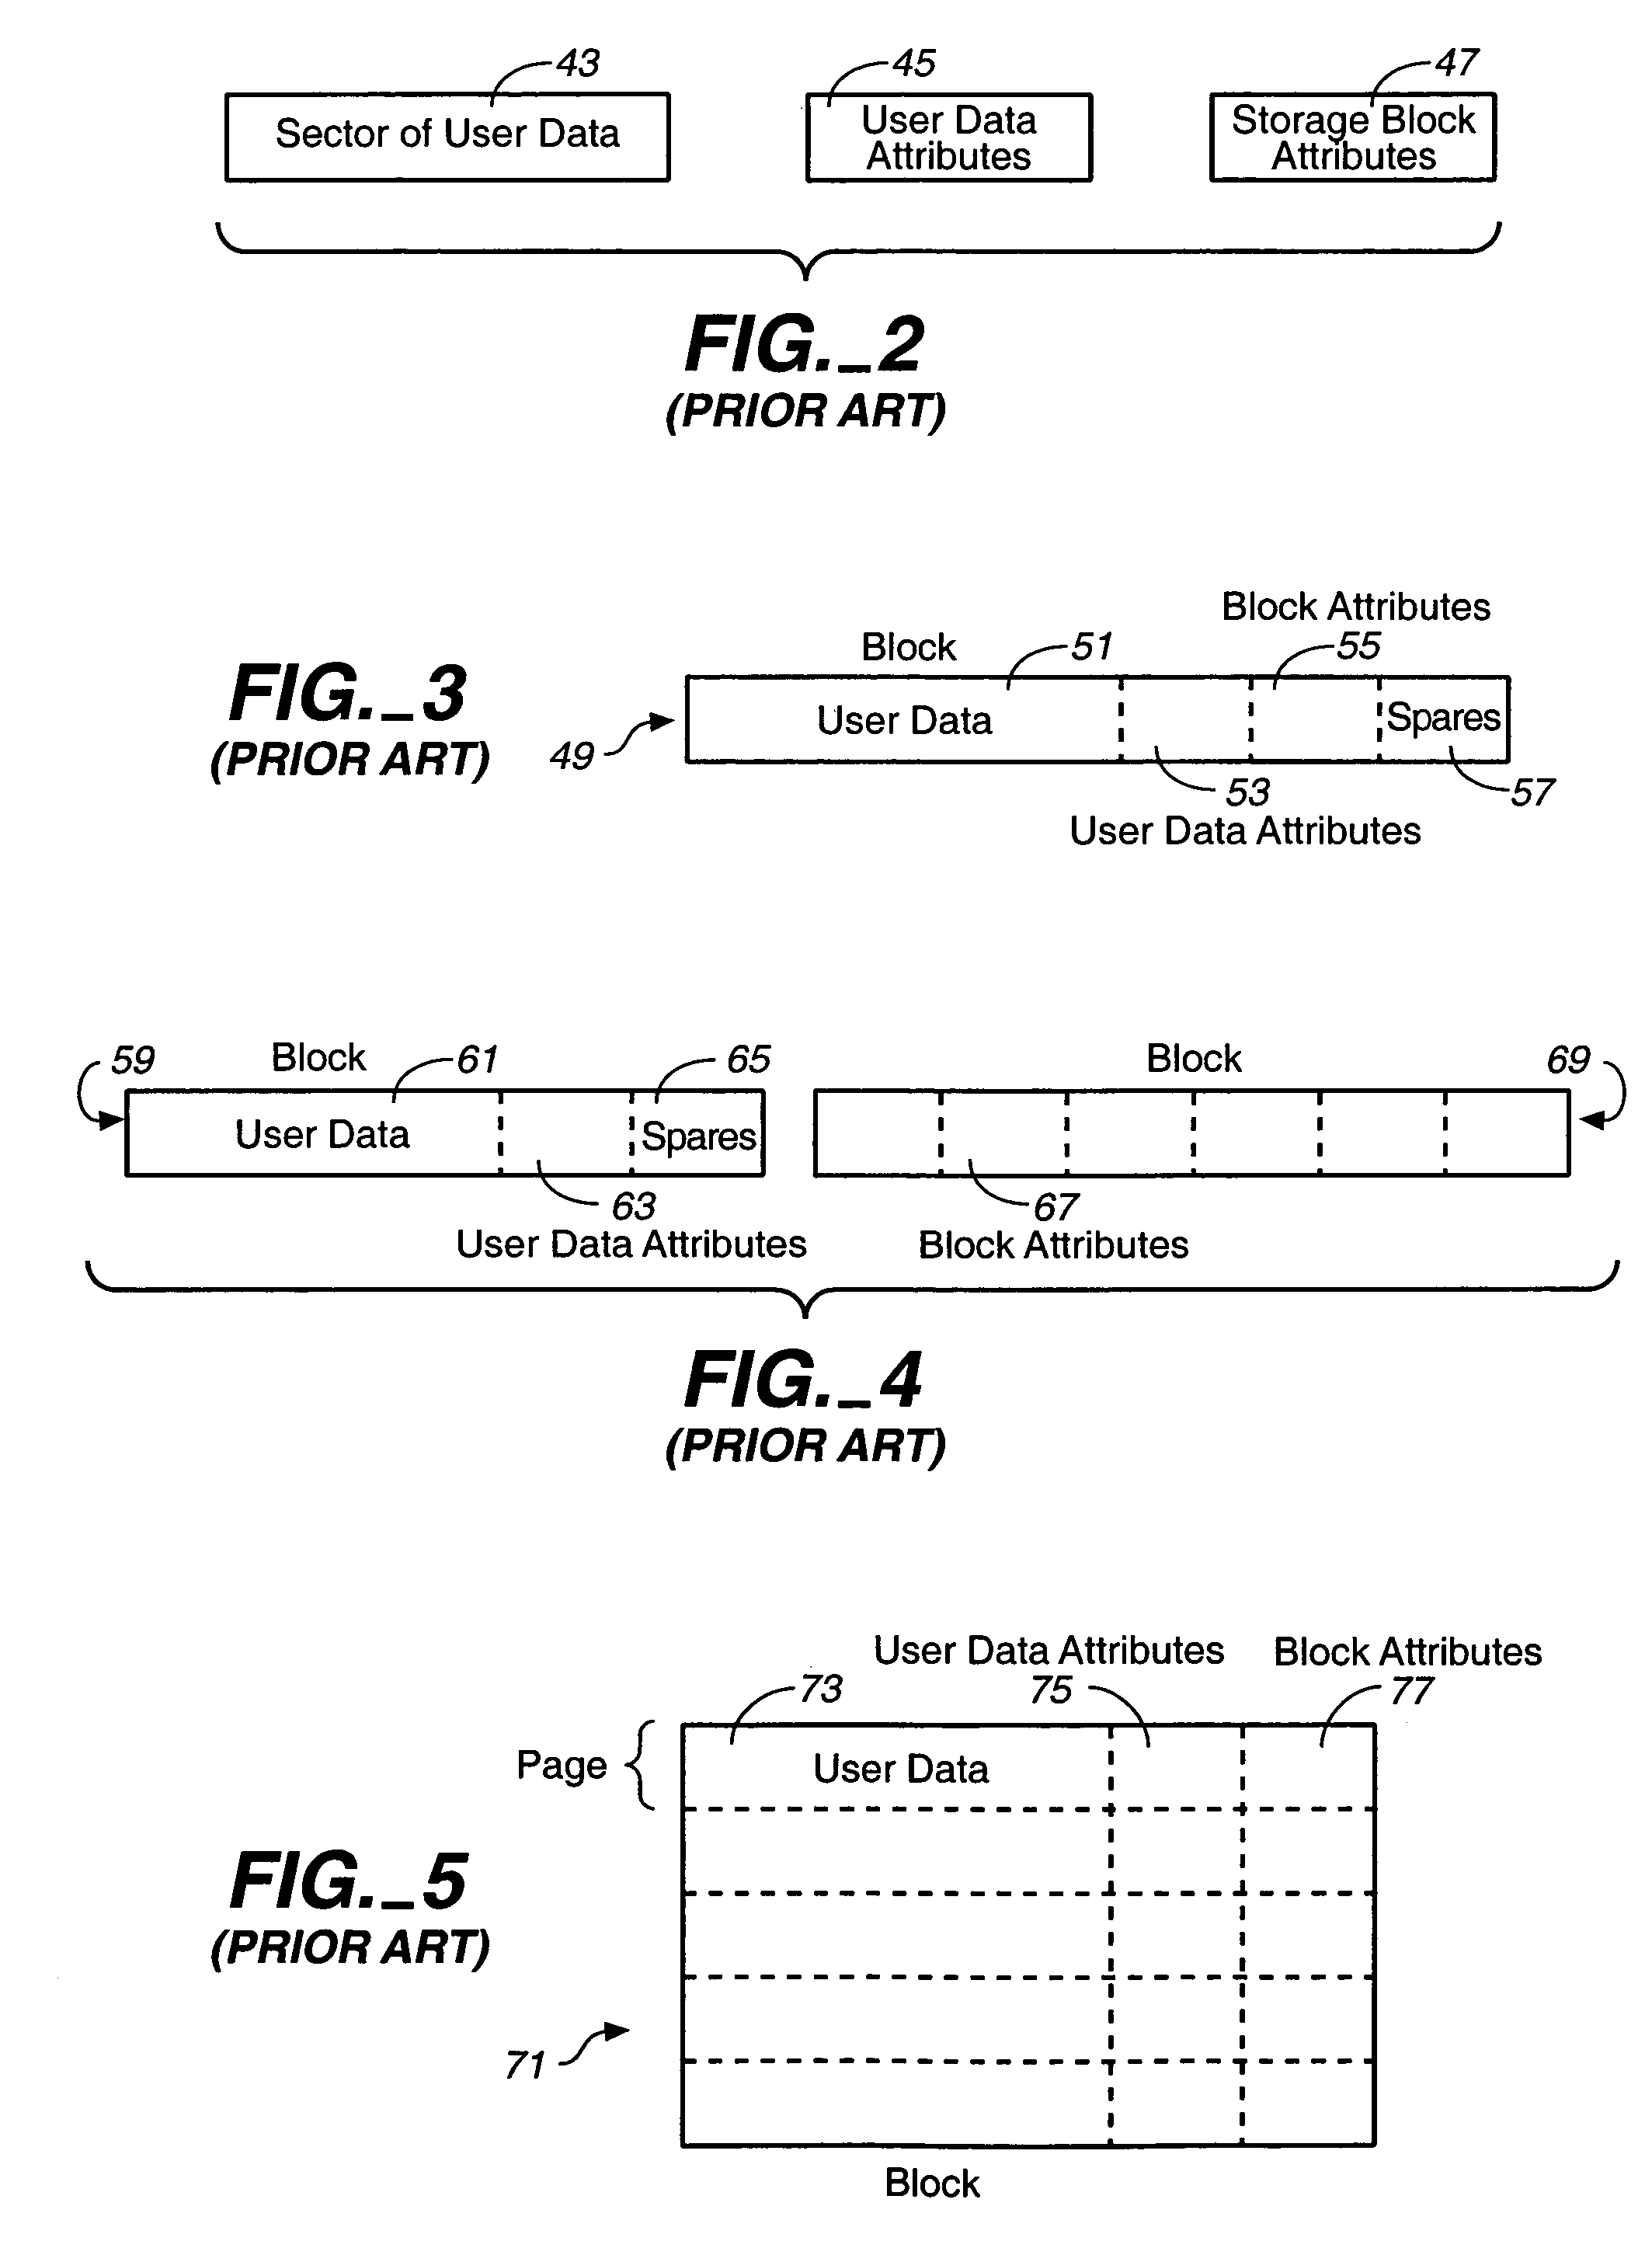 Techniques for operating non-volatile memory systems with data sectors having different sizes than the sizes of the pages and/or blocks of the memory